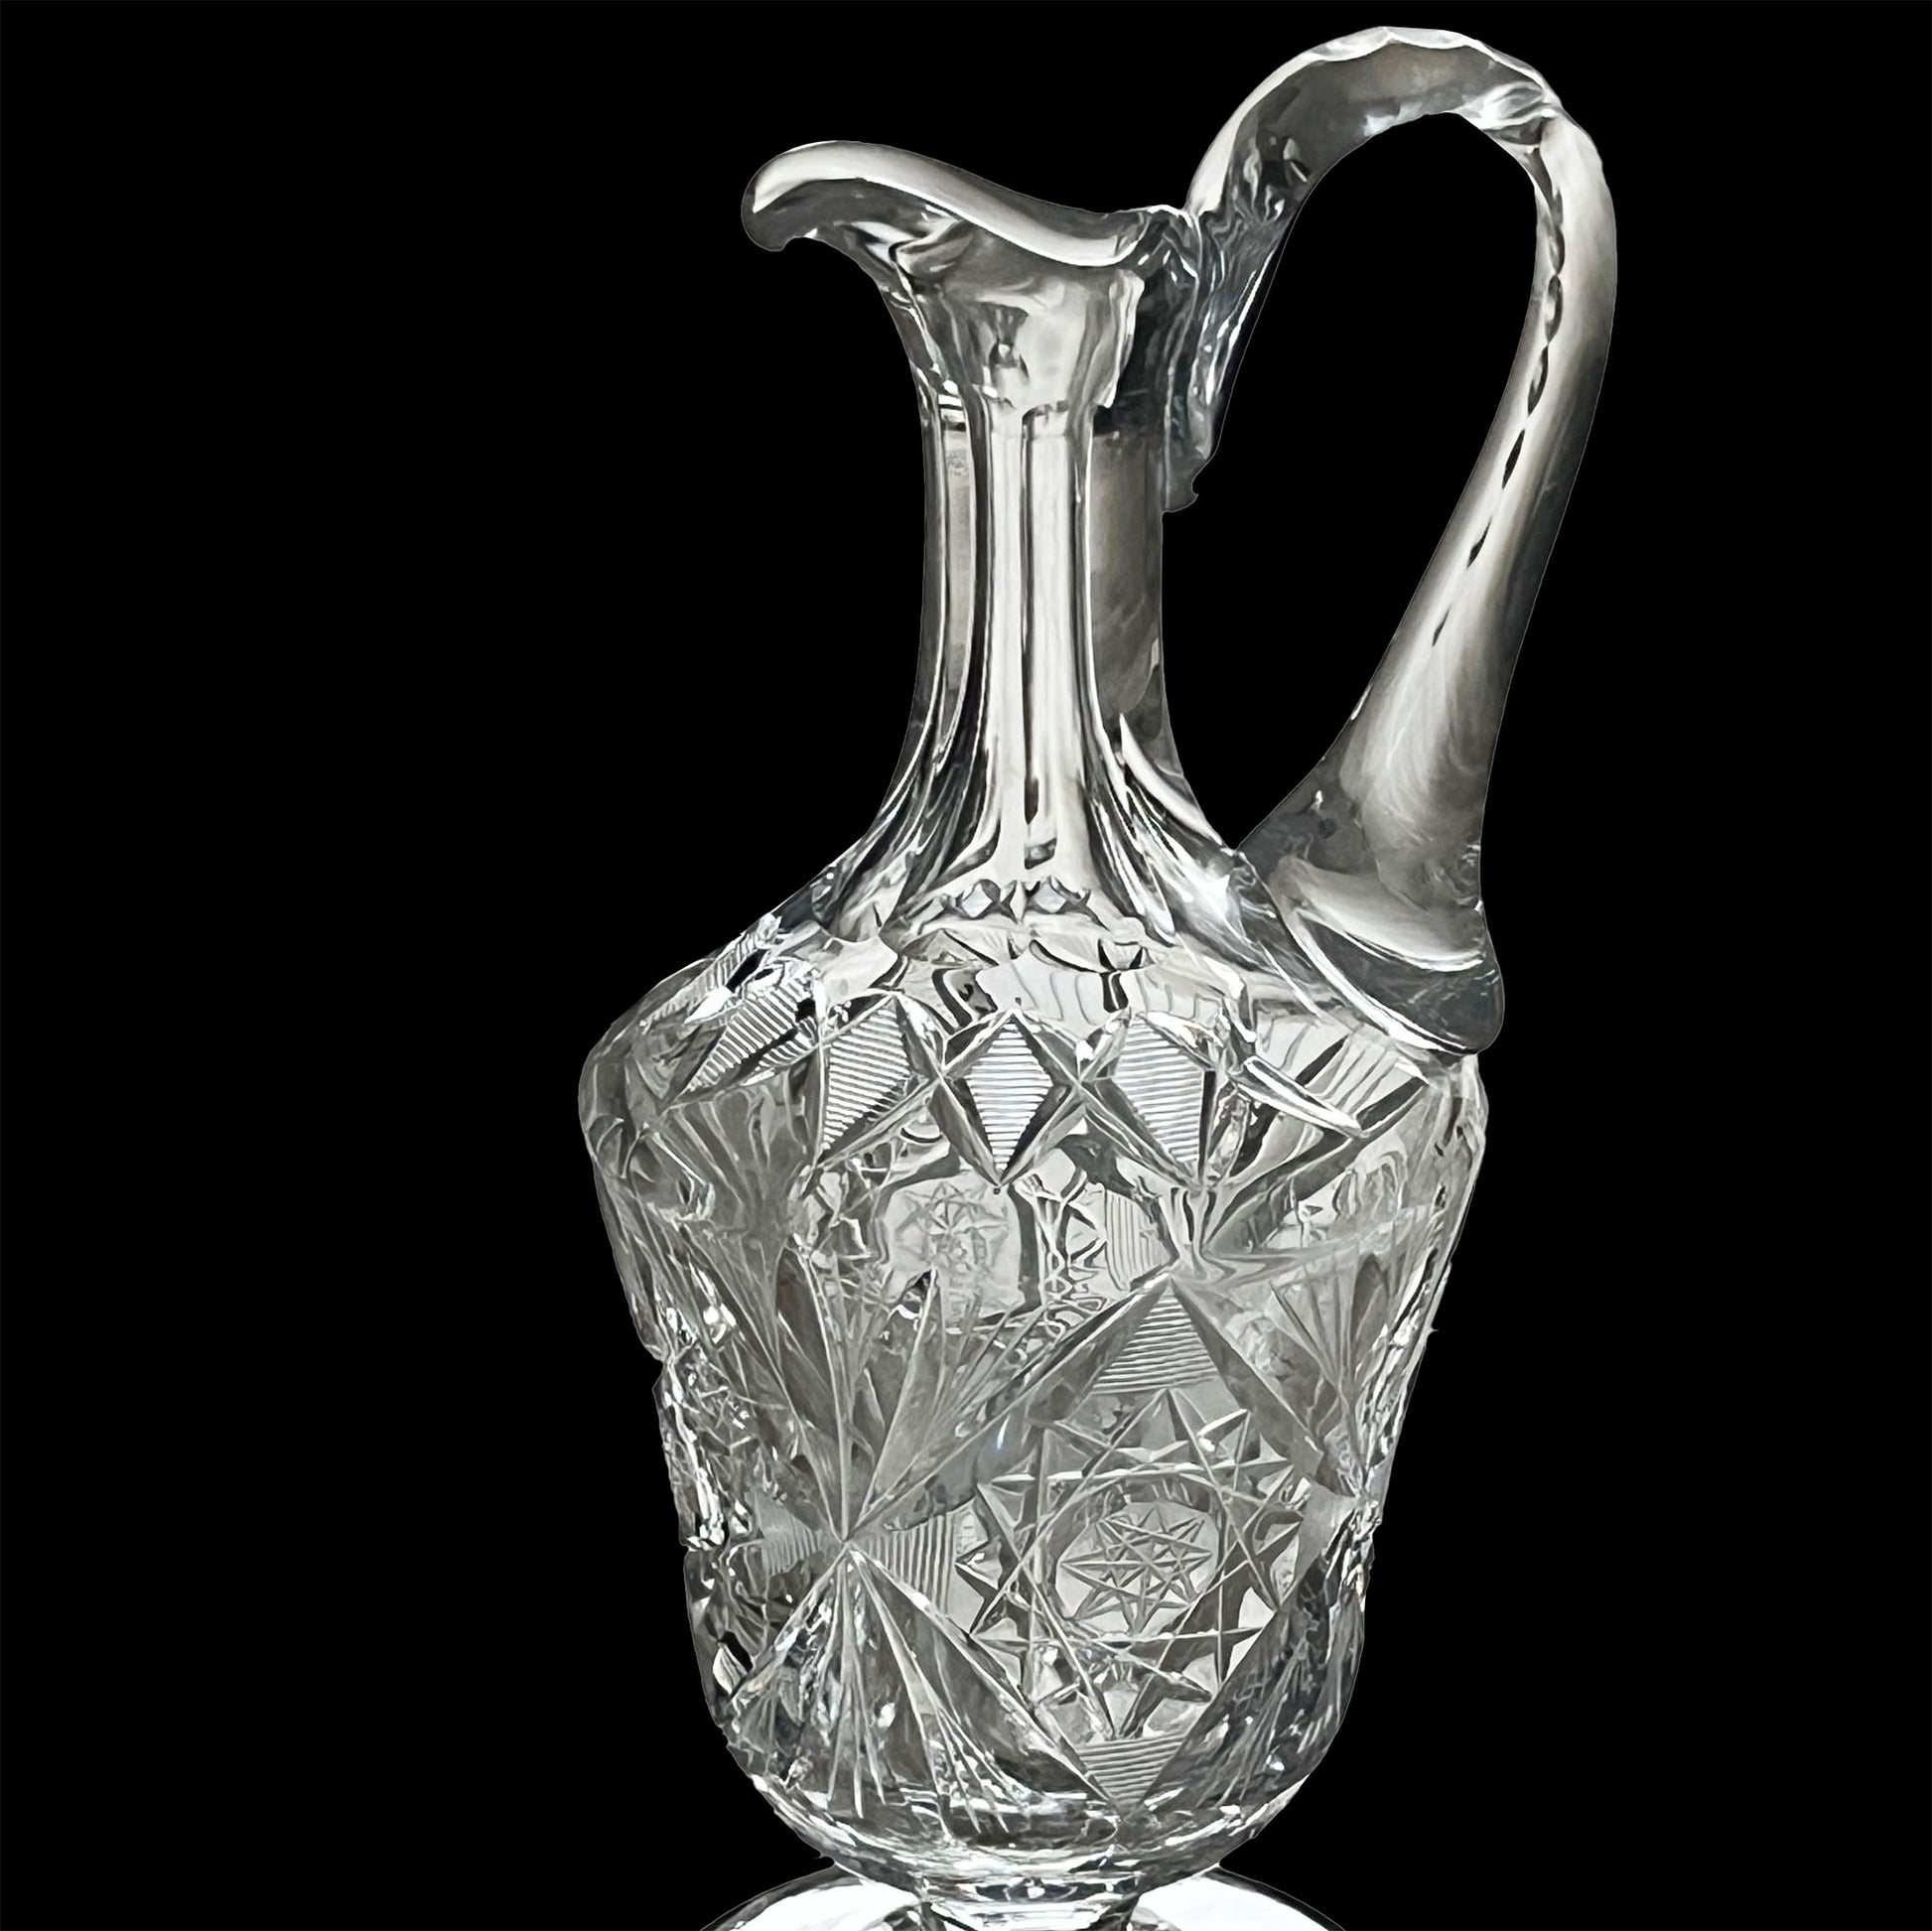 American-Brilliant-Lead-Crystal-Tall-Side-view.-Pitcher.-Shop-eBargainsAndDeals.com